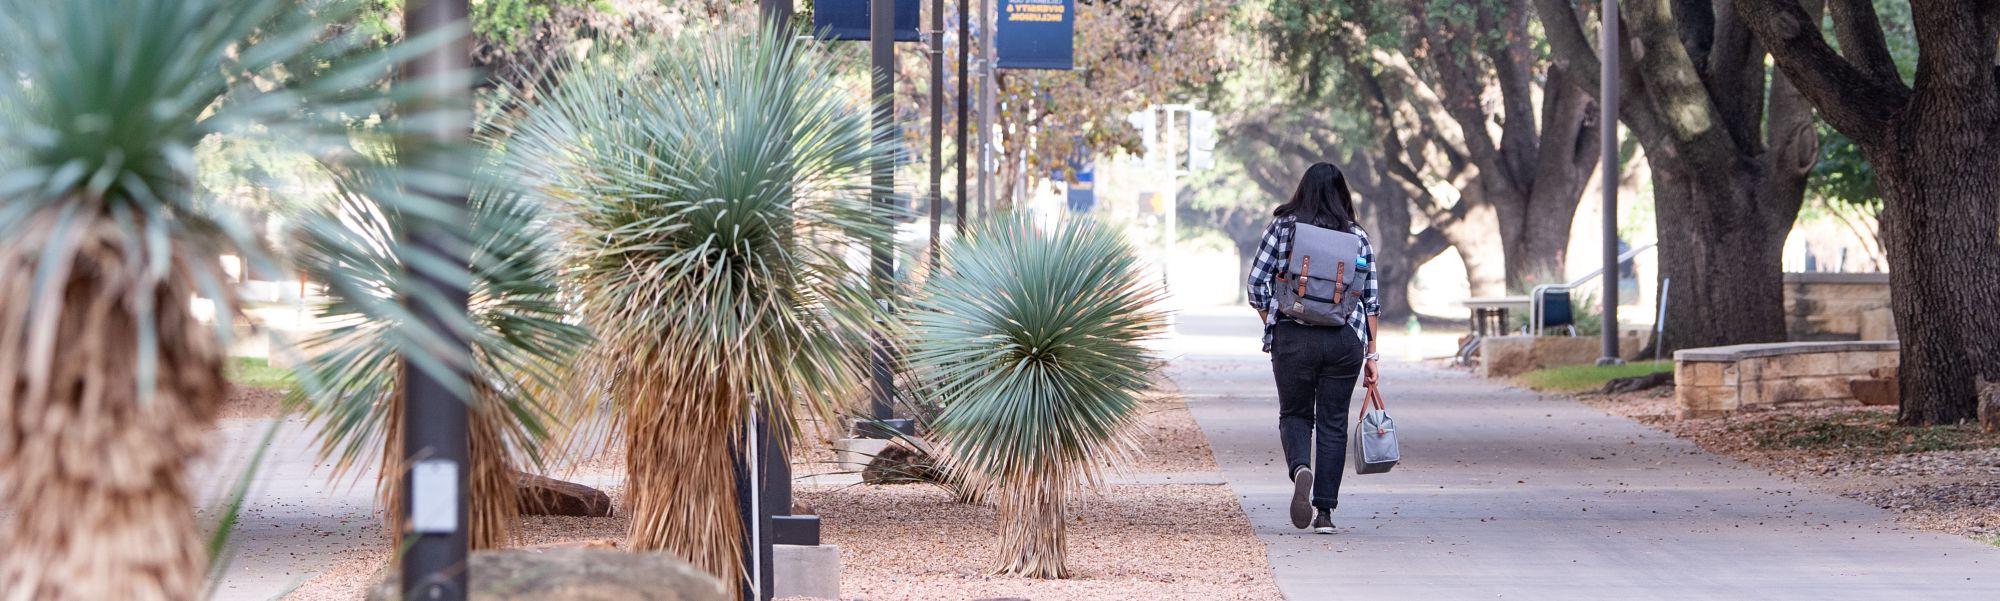 Student walking on a long sidewalk with Angelo State banners on light poles